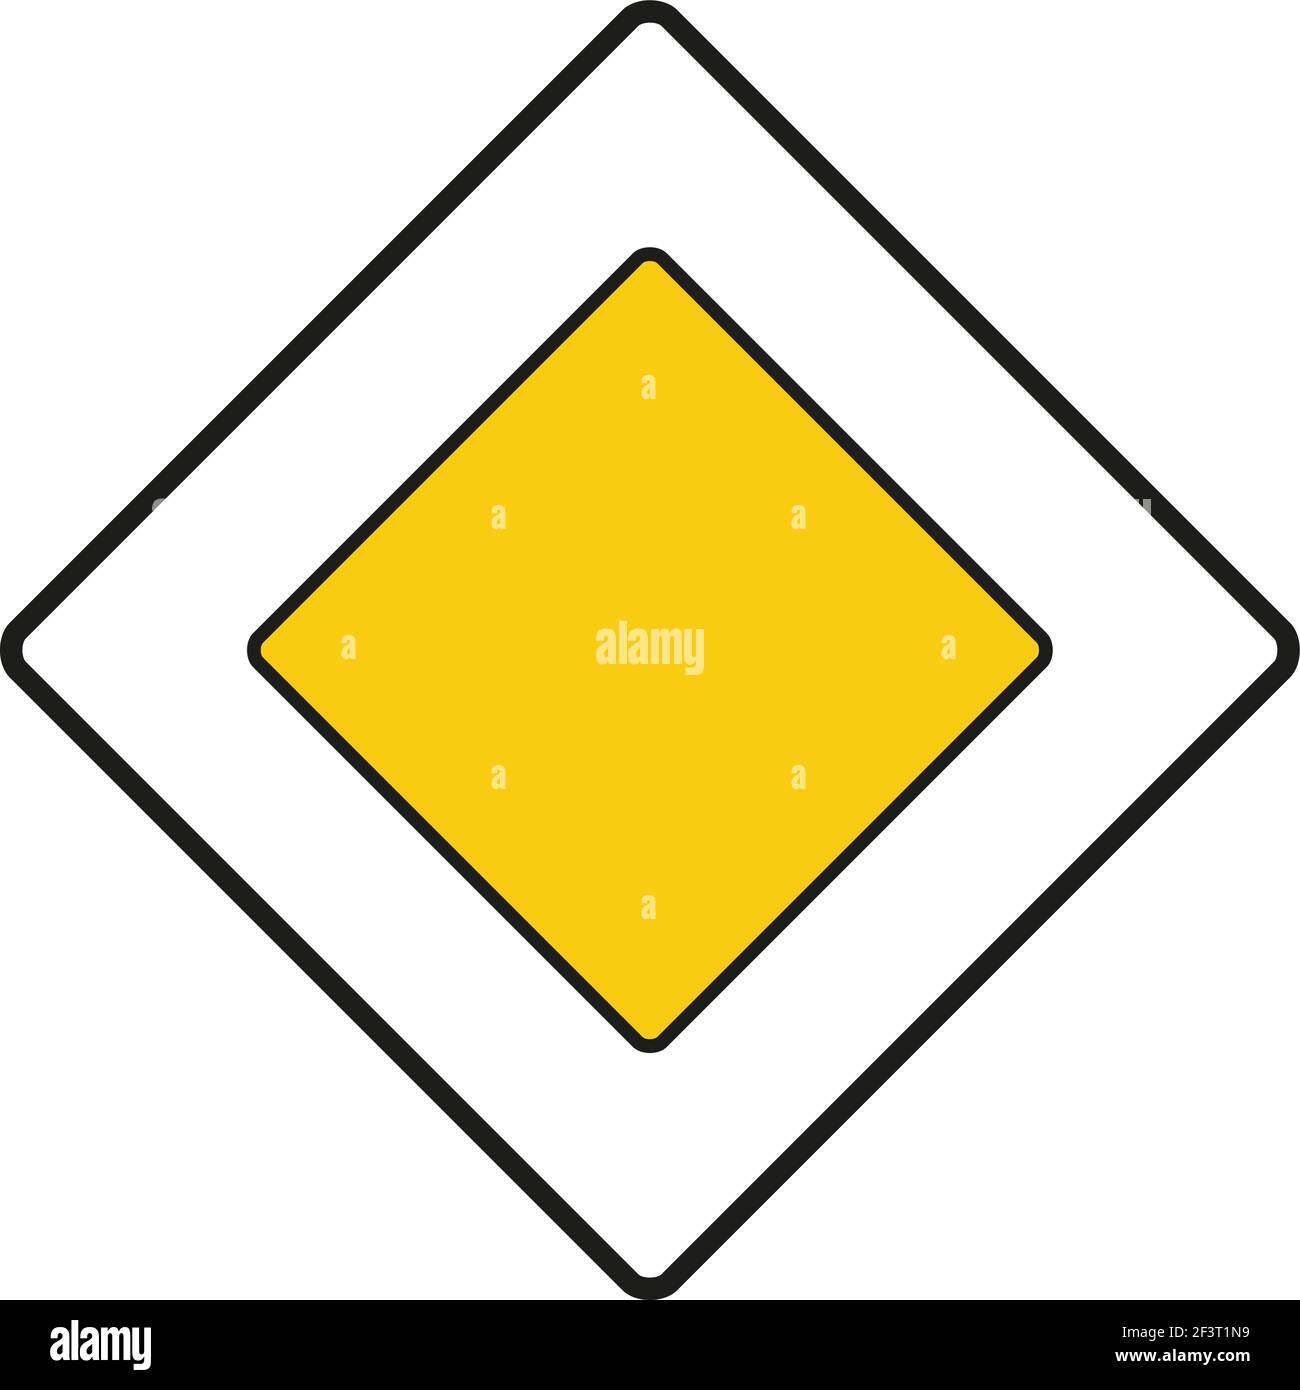 Rhomboid traffic signal in white and yellow, isolated on white background. Priority road Stock Vector